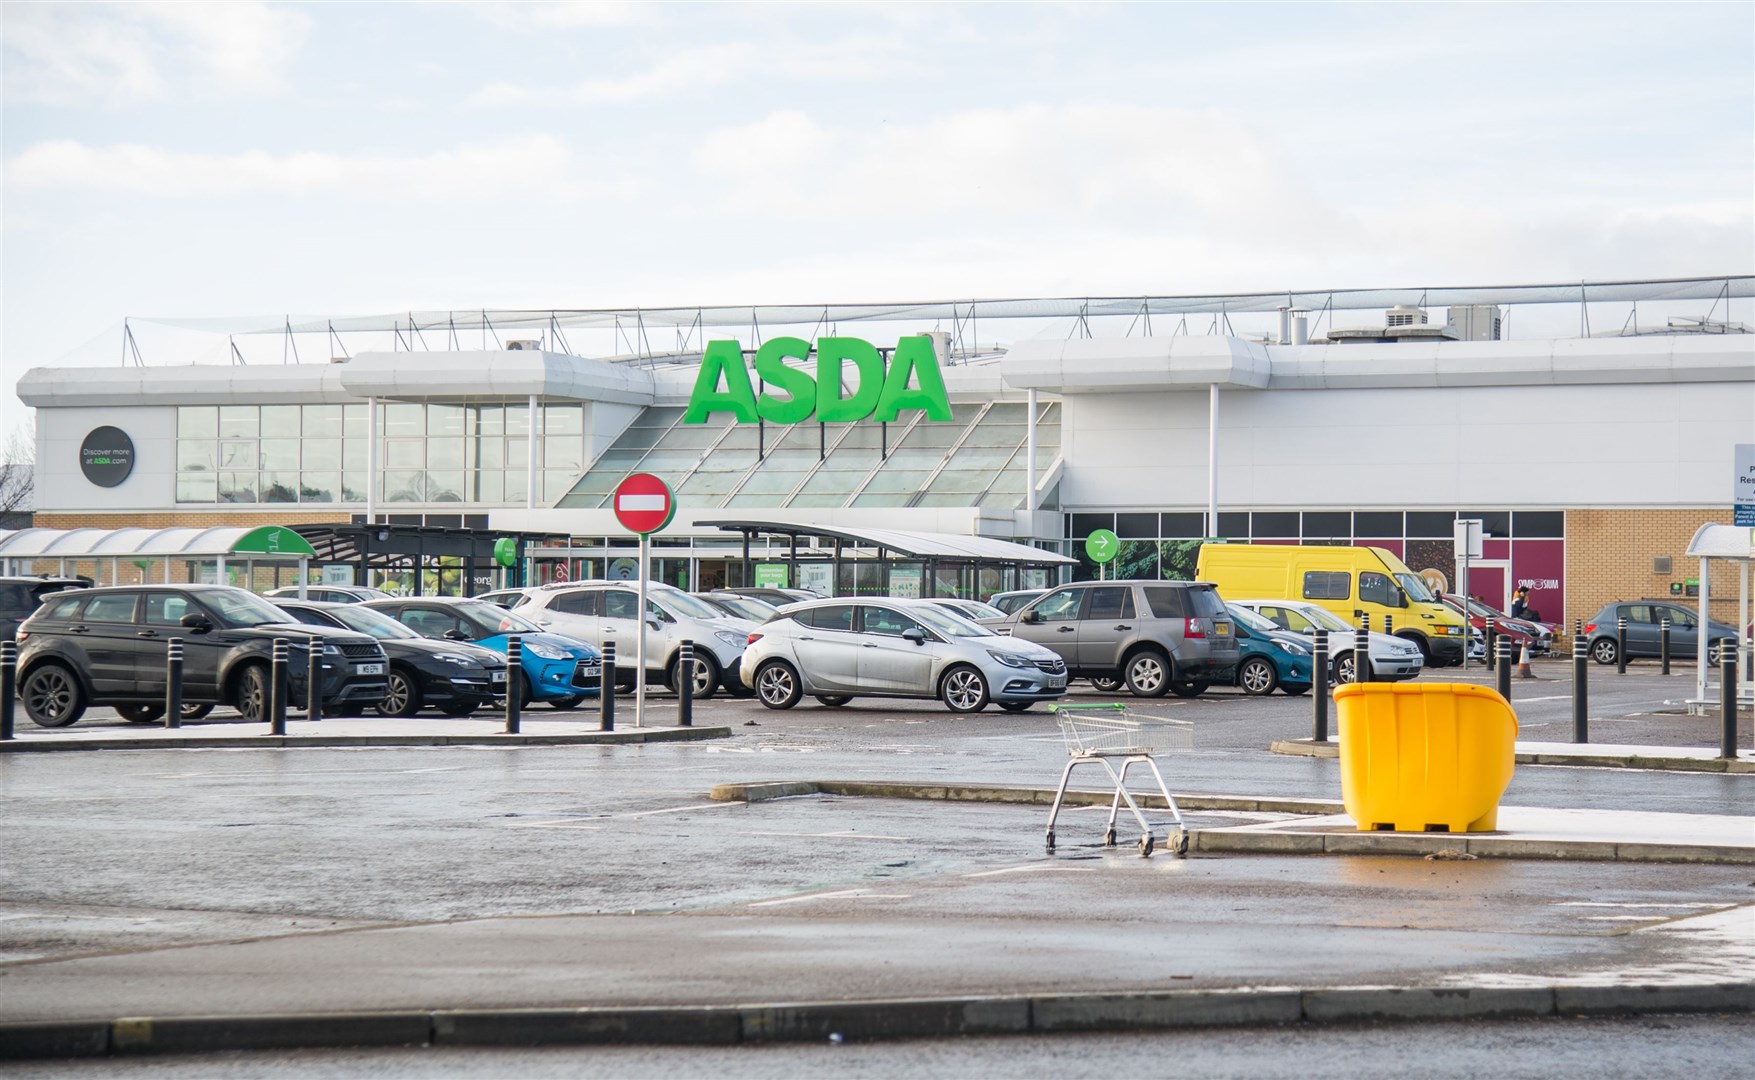 Asda Superstore in Elgin where the incident was caught on CCTV.